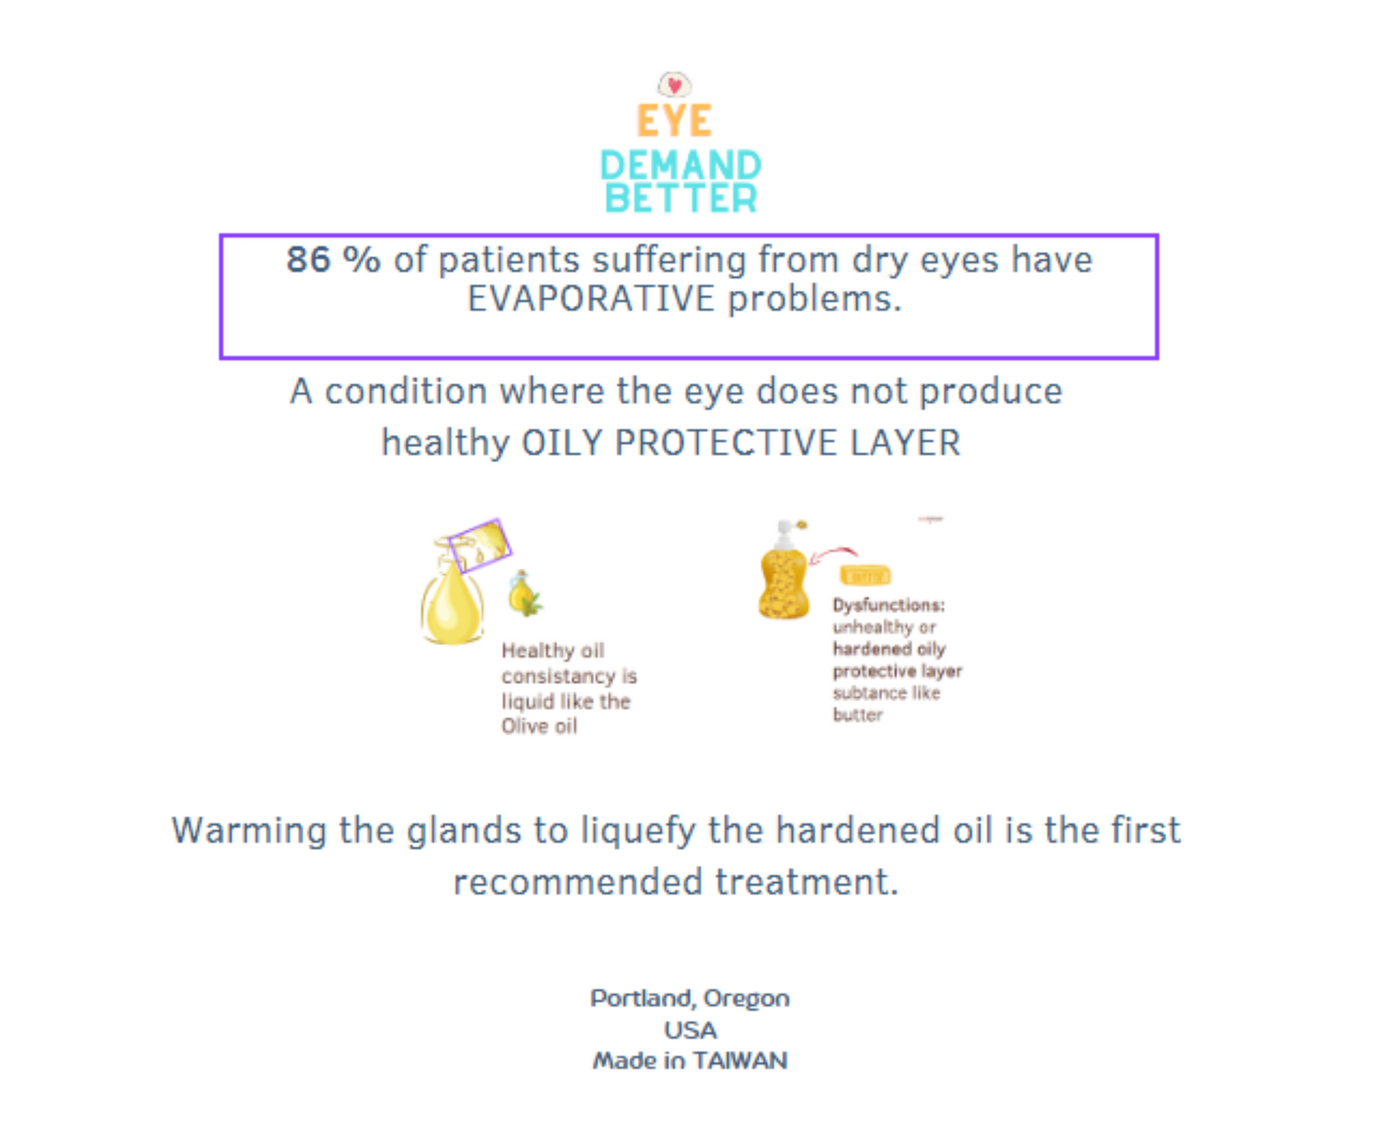 Do you know that 86% of patients suffering from dry eyes have evaporative problems.